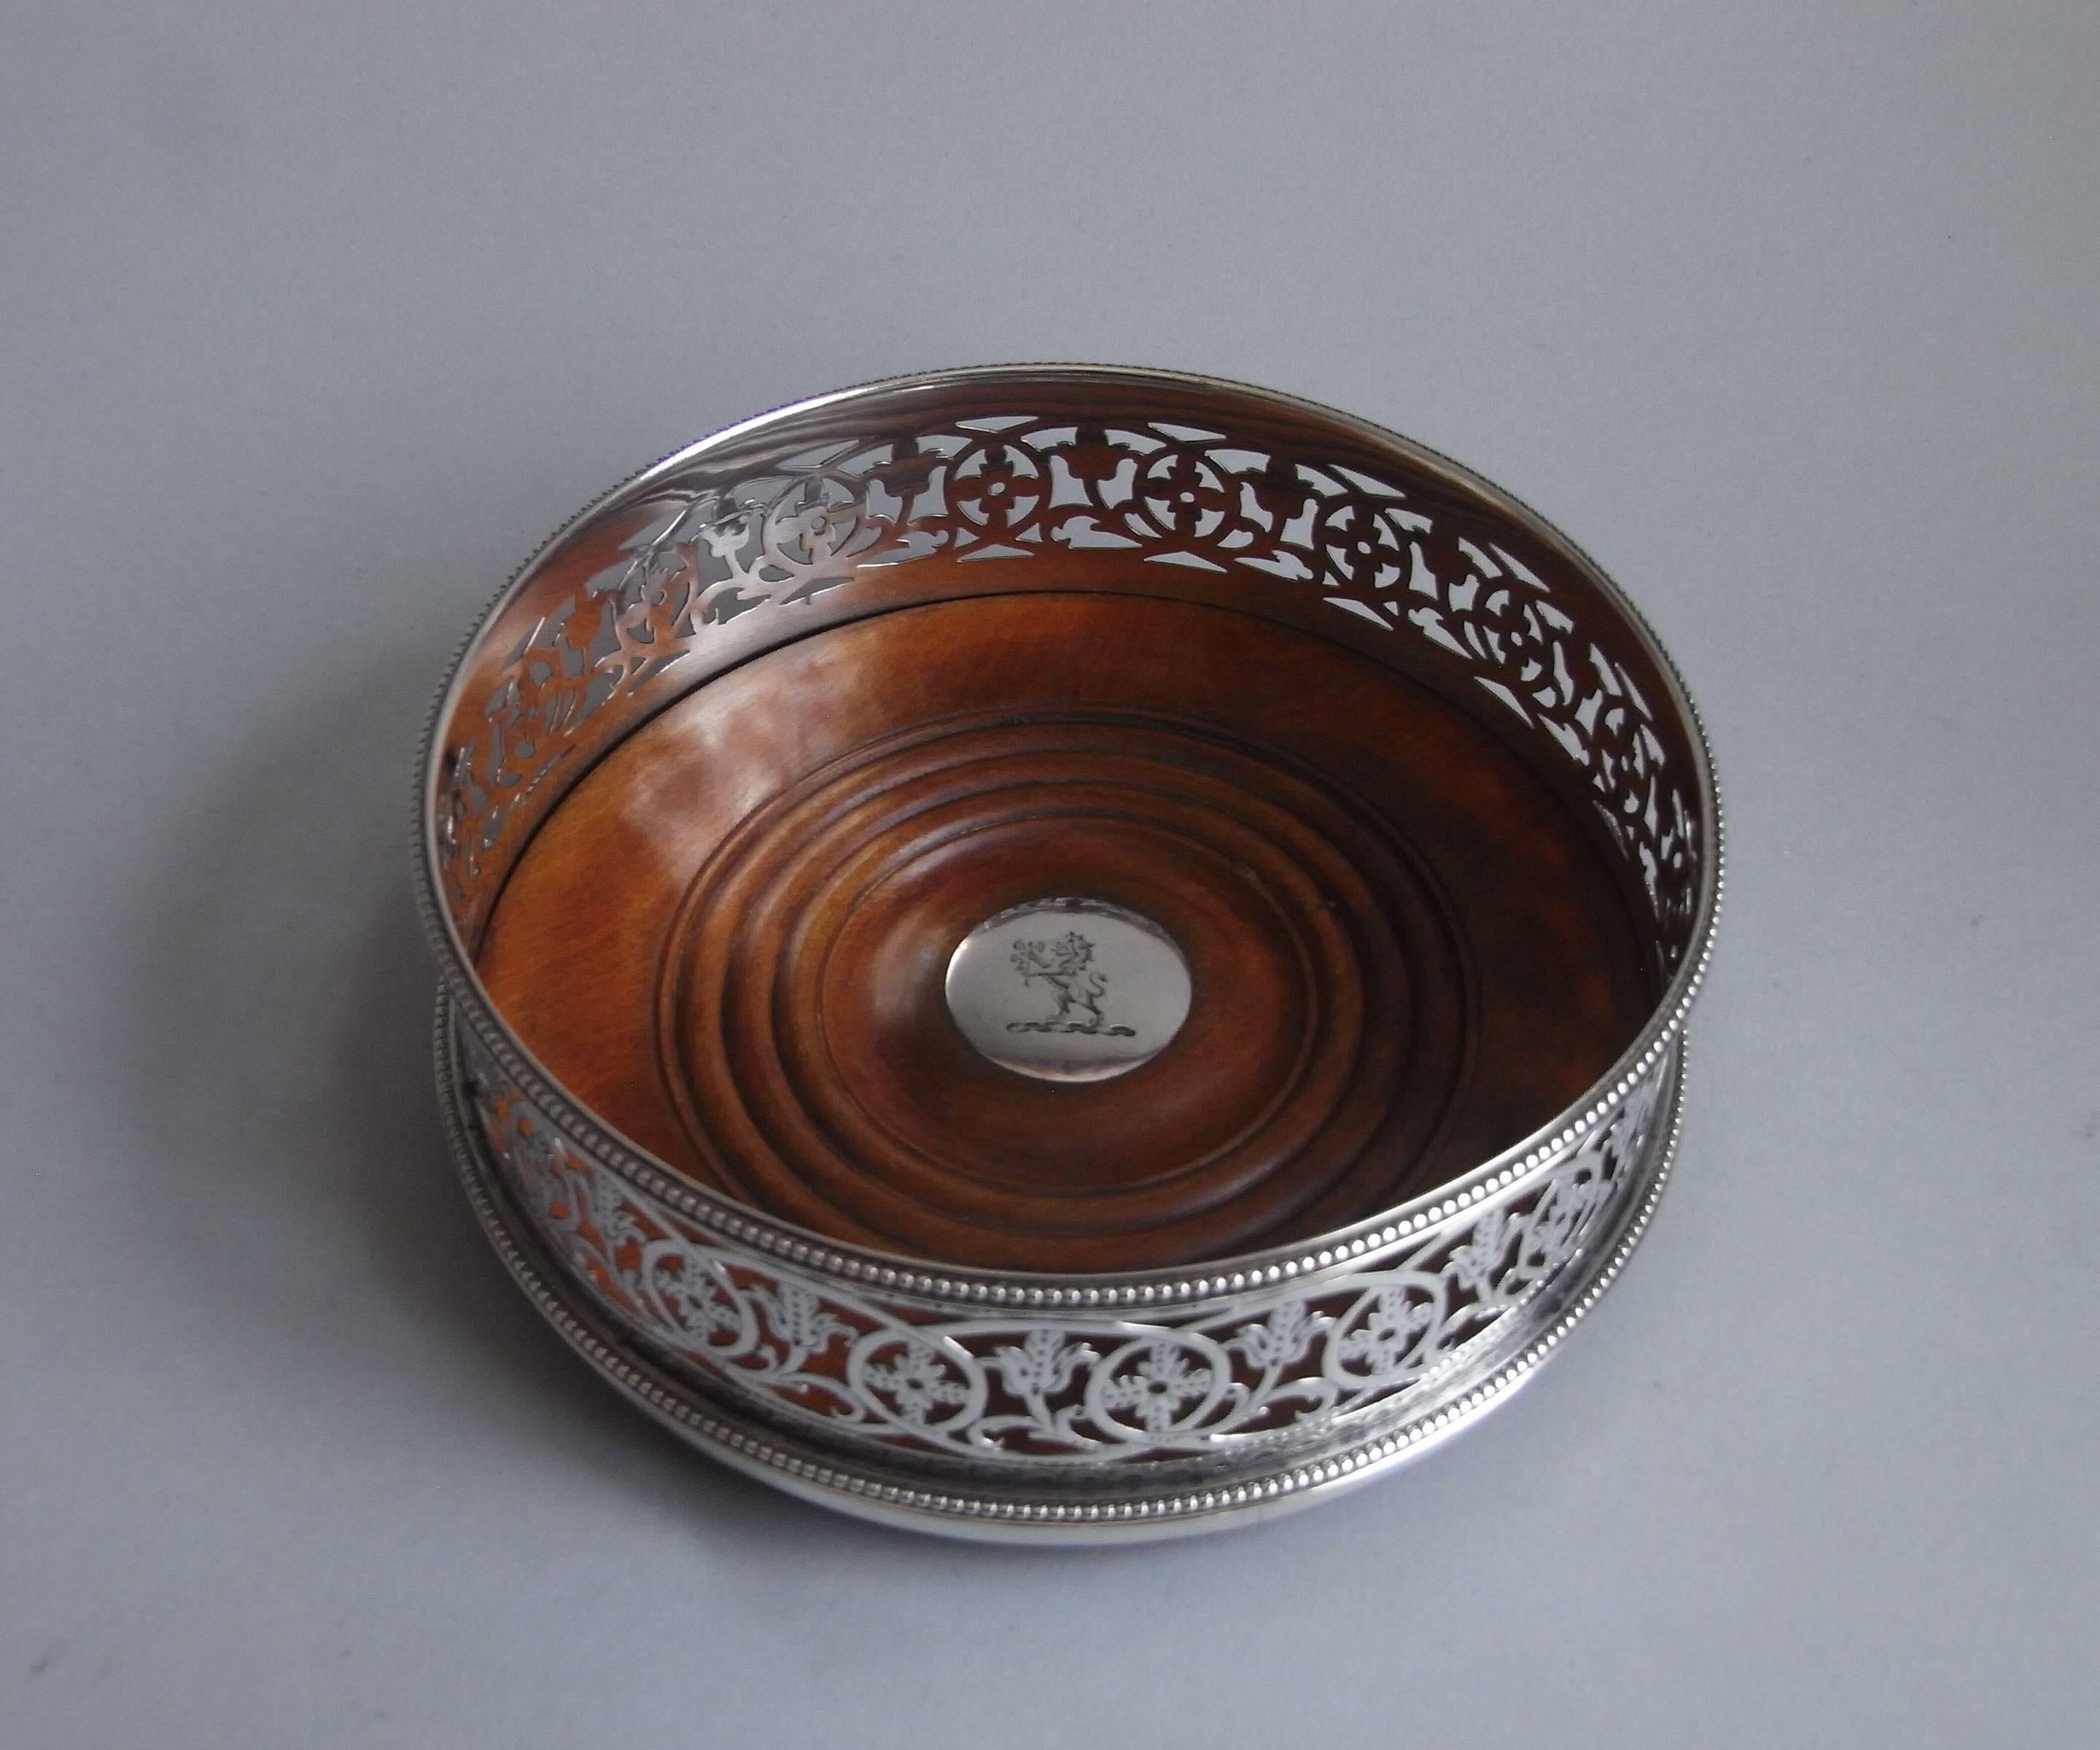 The wine coasters are circular in form and display deep sides decorated with a beaded band on the base and the rim. The sides are beautifully pierced and engraved with trailing floral sprigs and flower heads in ovals. The sides also display both